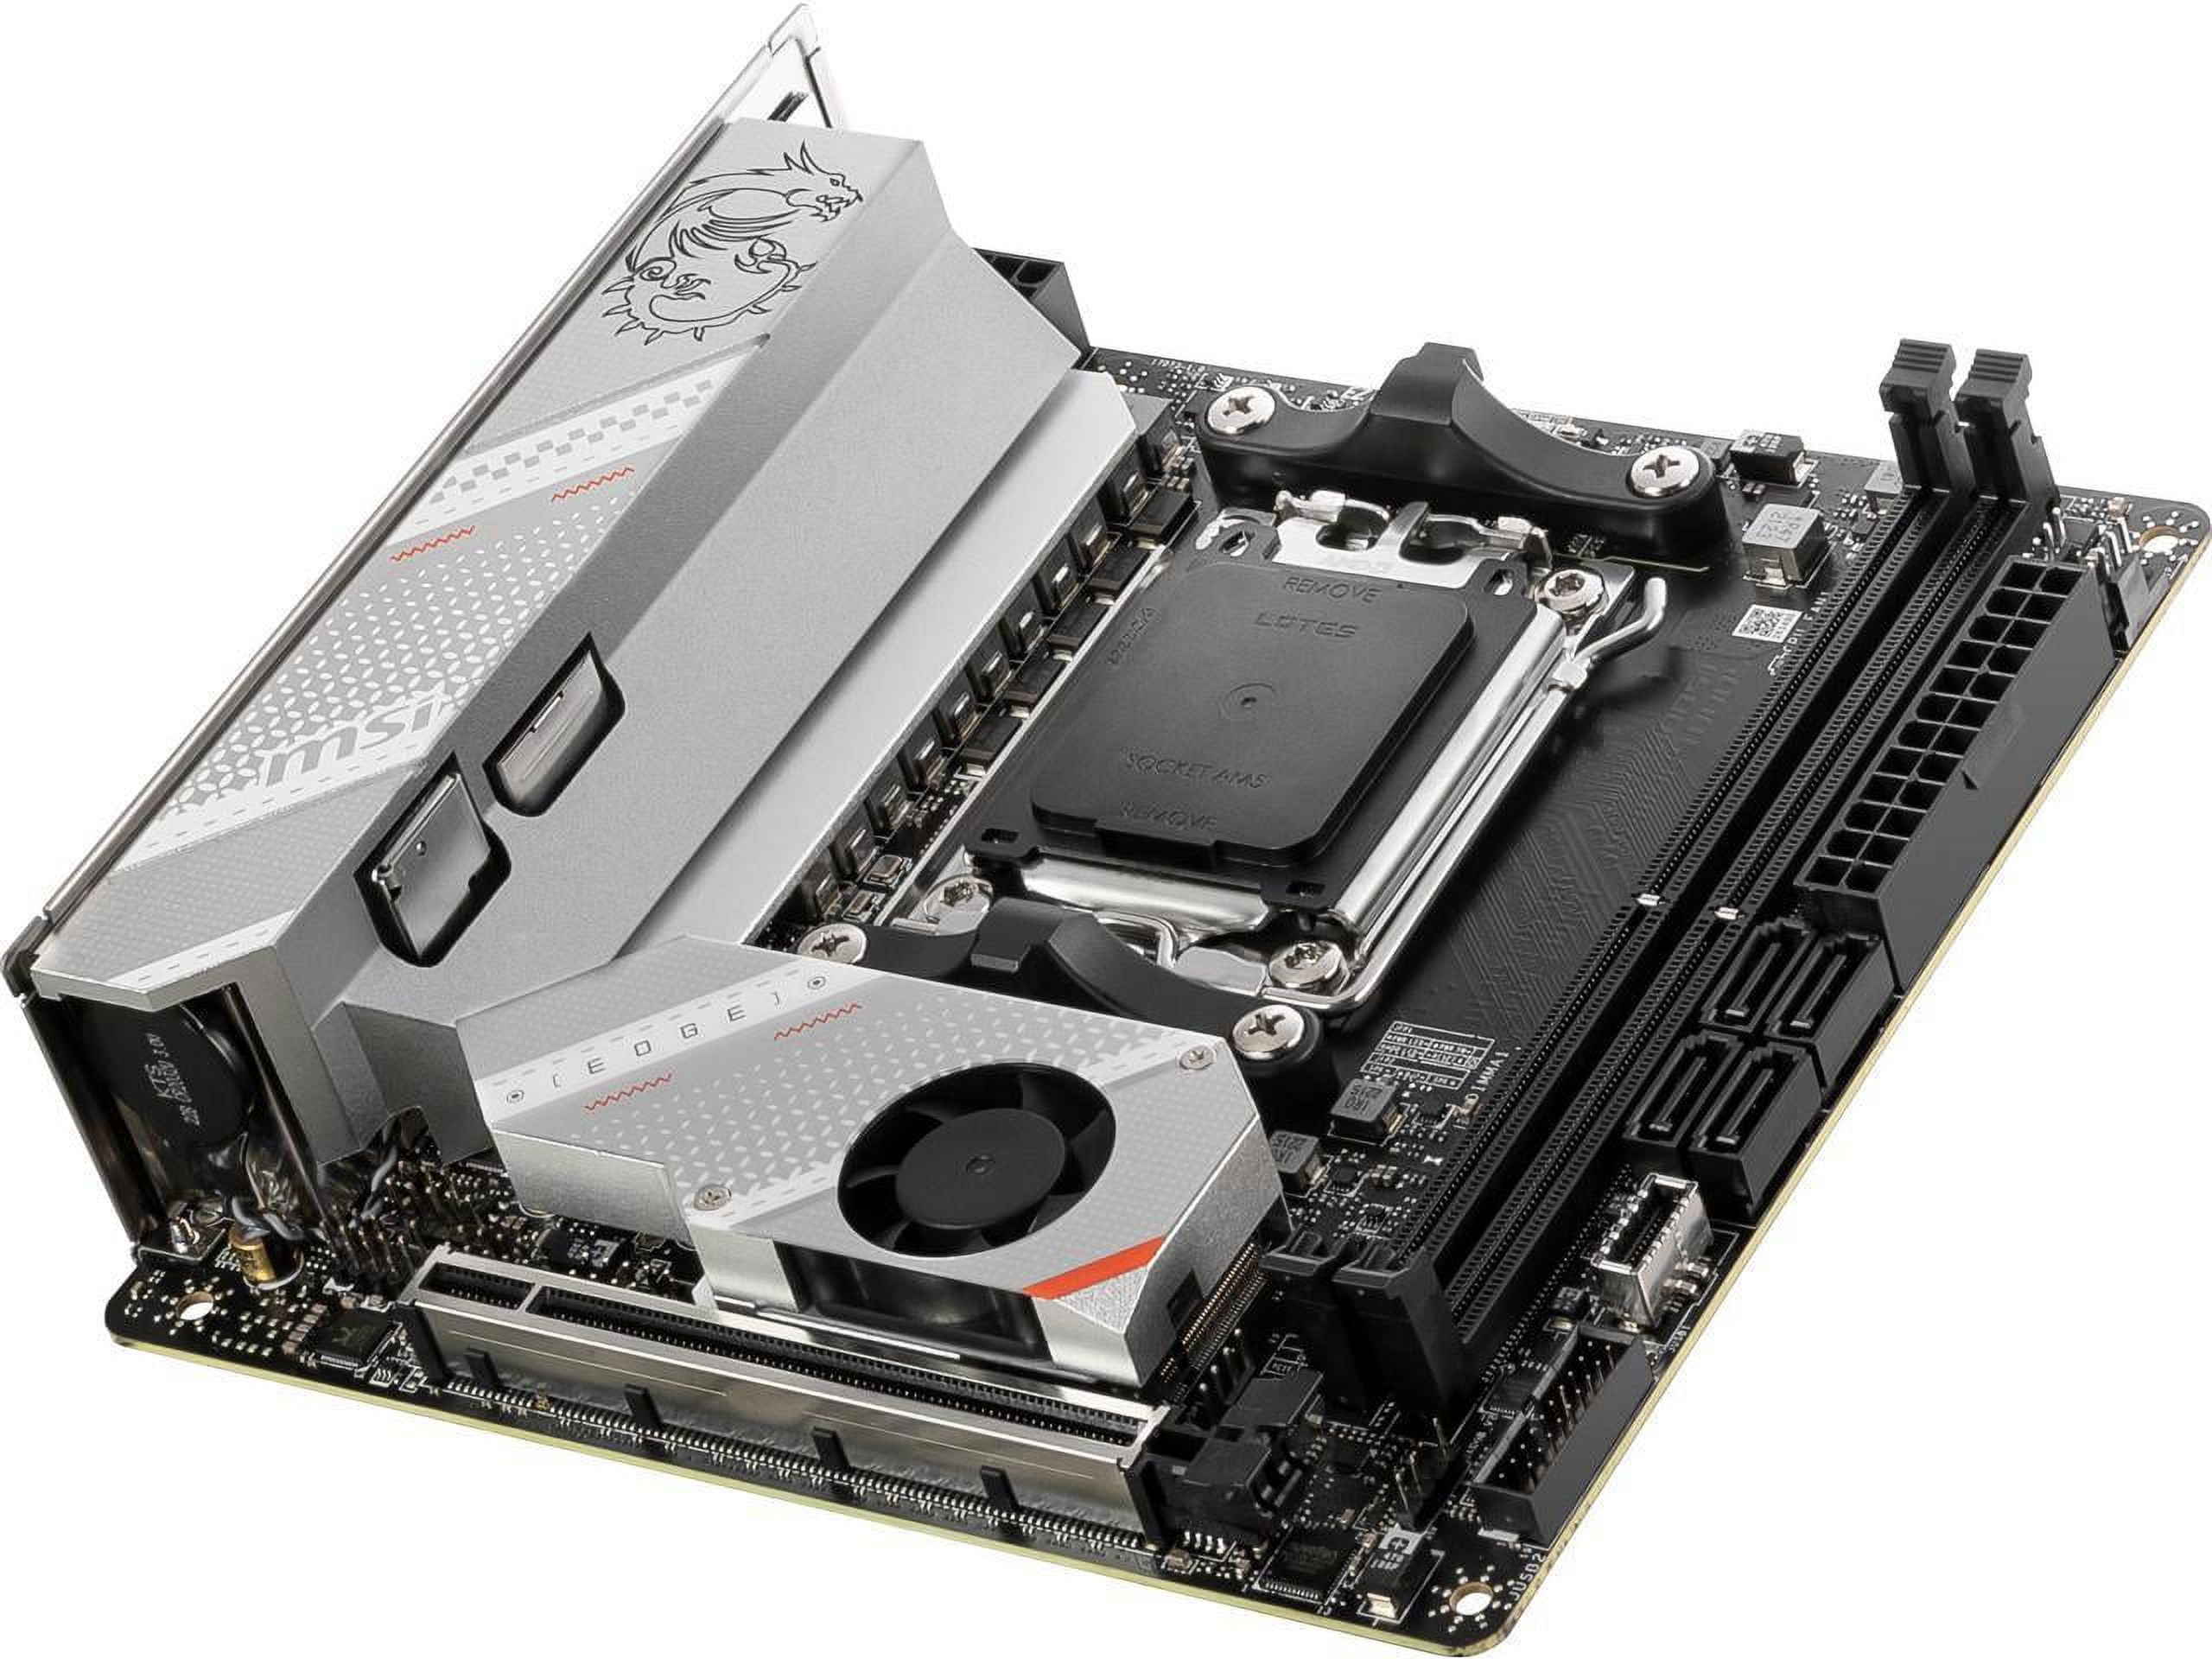 This Asus Mini ITX motherboard is perfect for SFF Ryzen 7000/8000 PCs